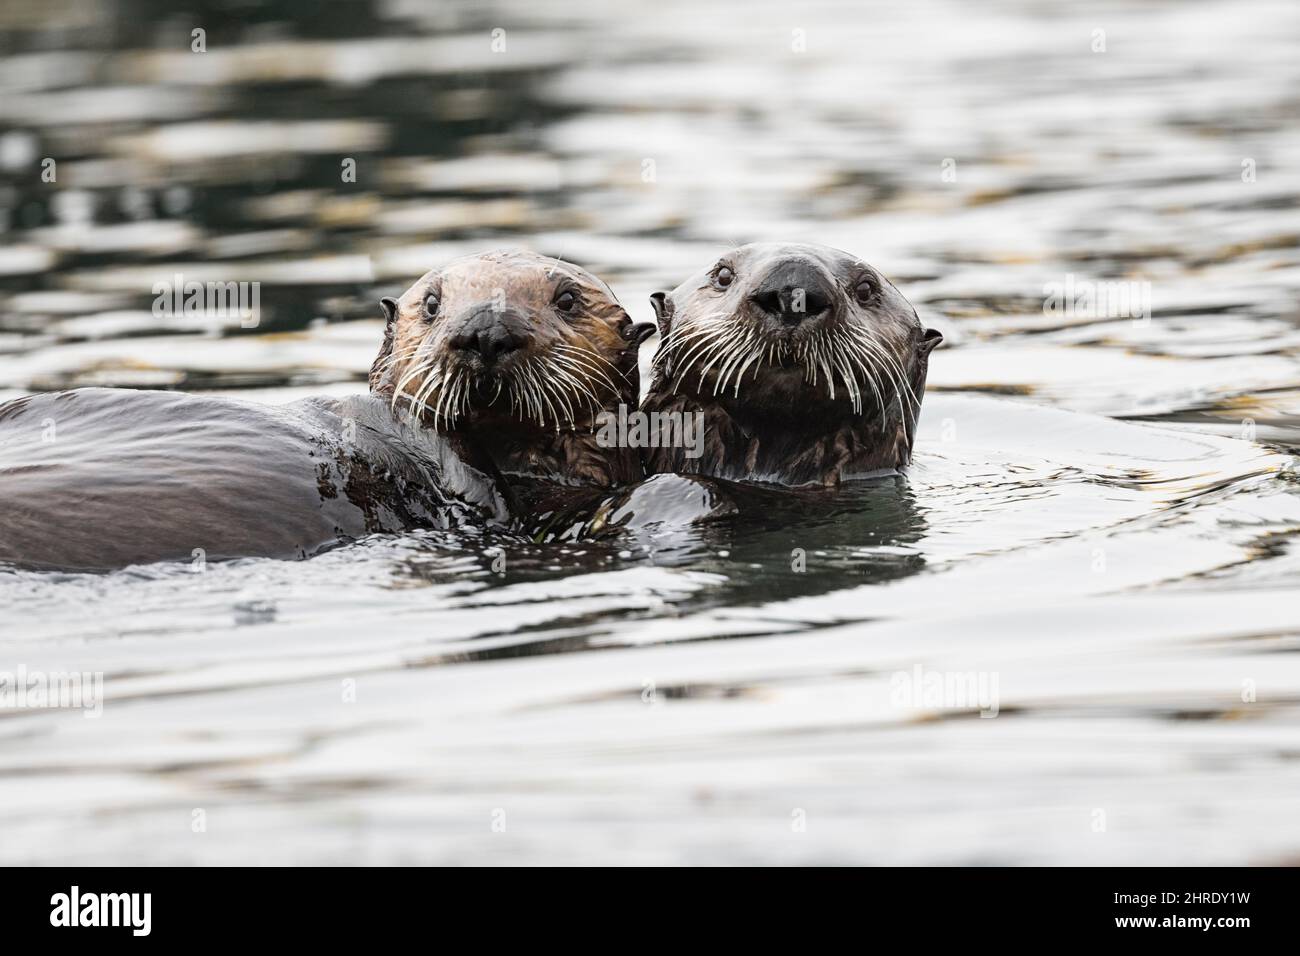 California sea otters, Enhyrdra lutris nereis ( threatened species ), juveniles playing together, Morro Bay, California, United States, Pacific Ocean Stock Photo